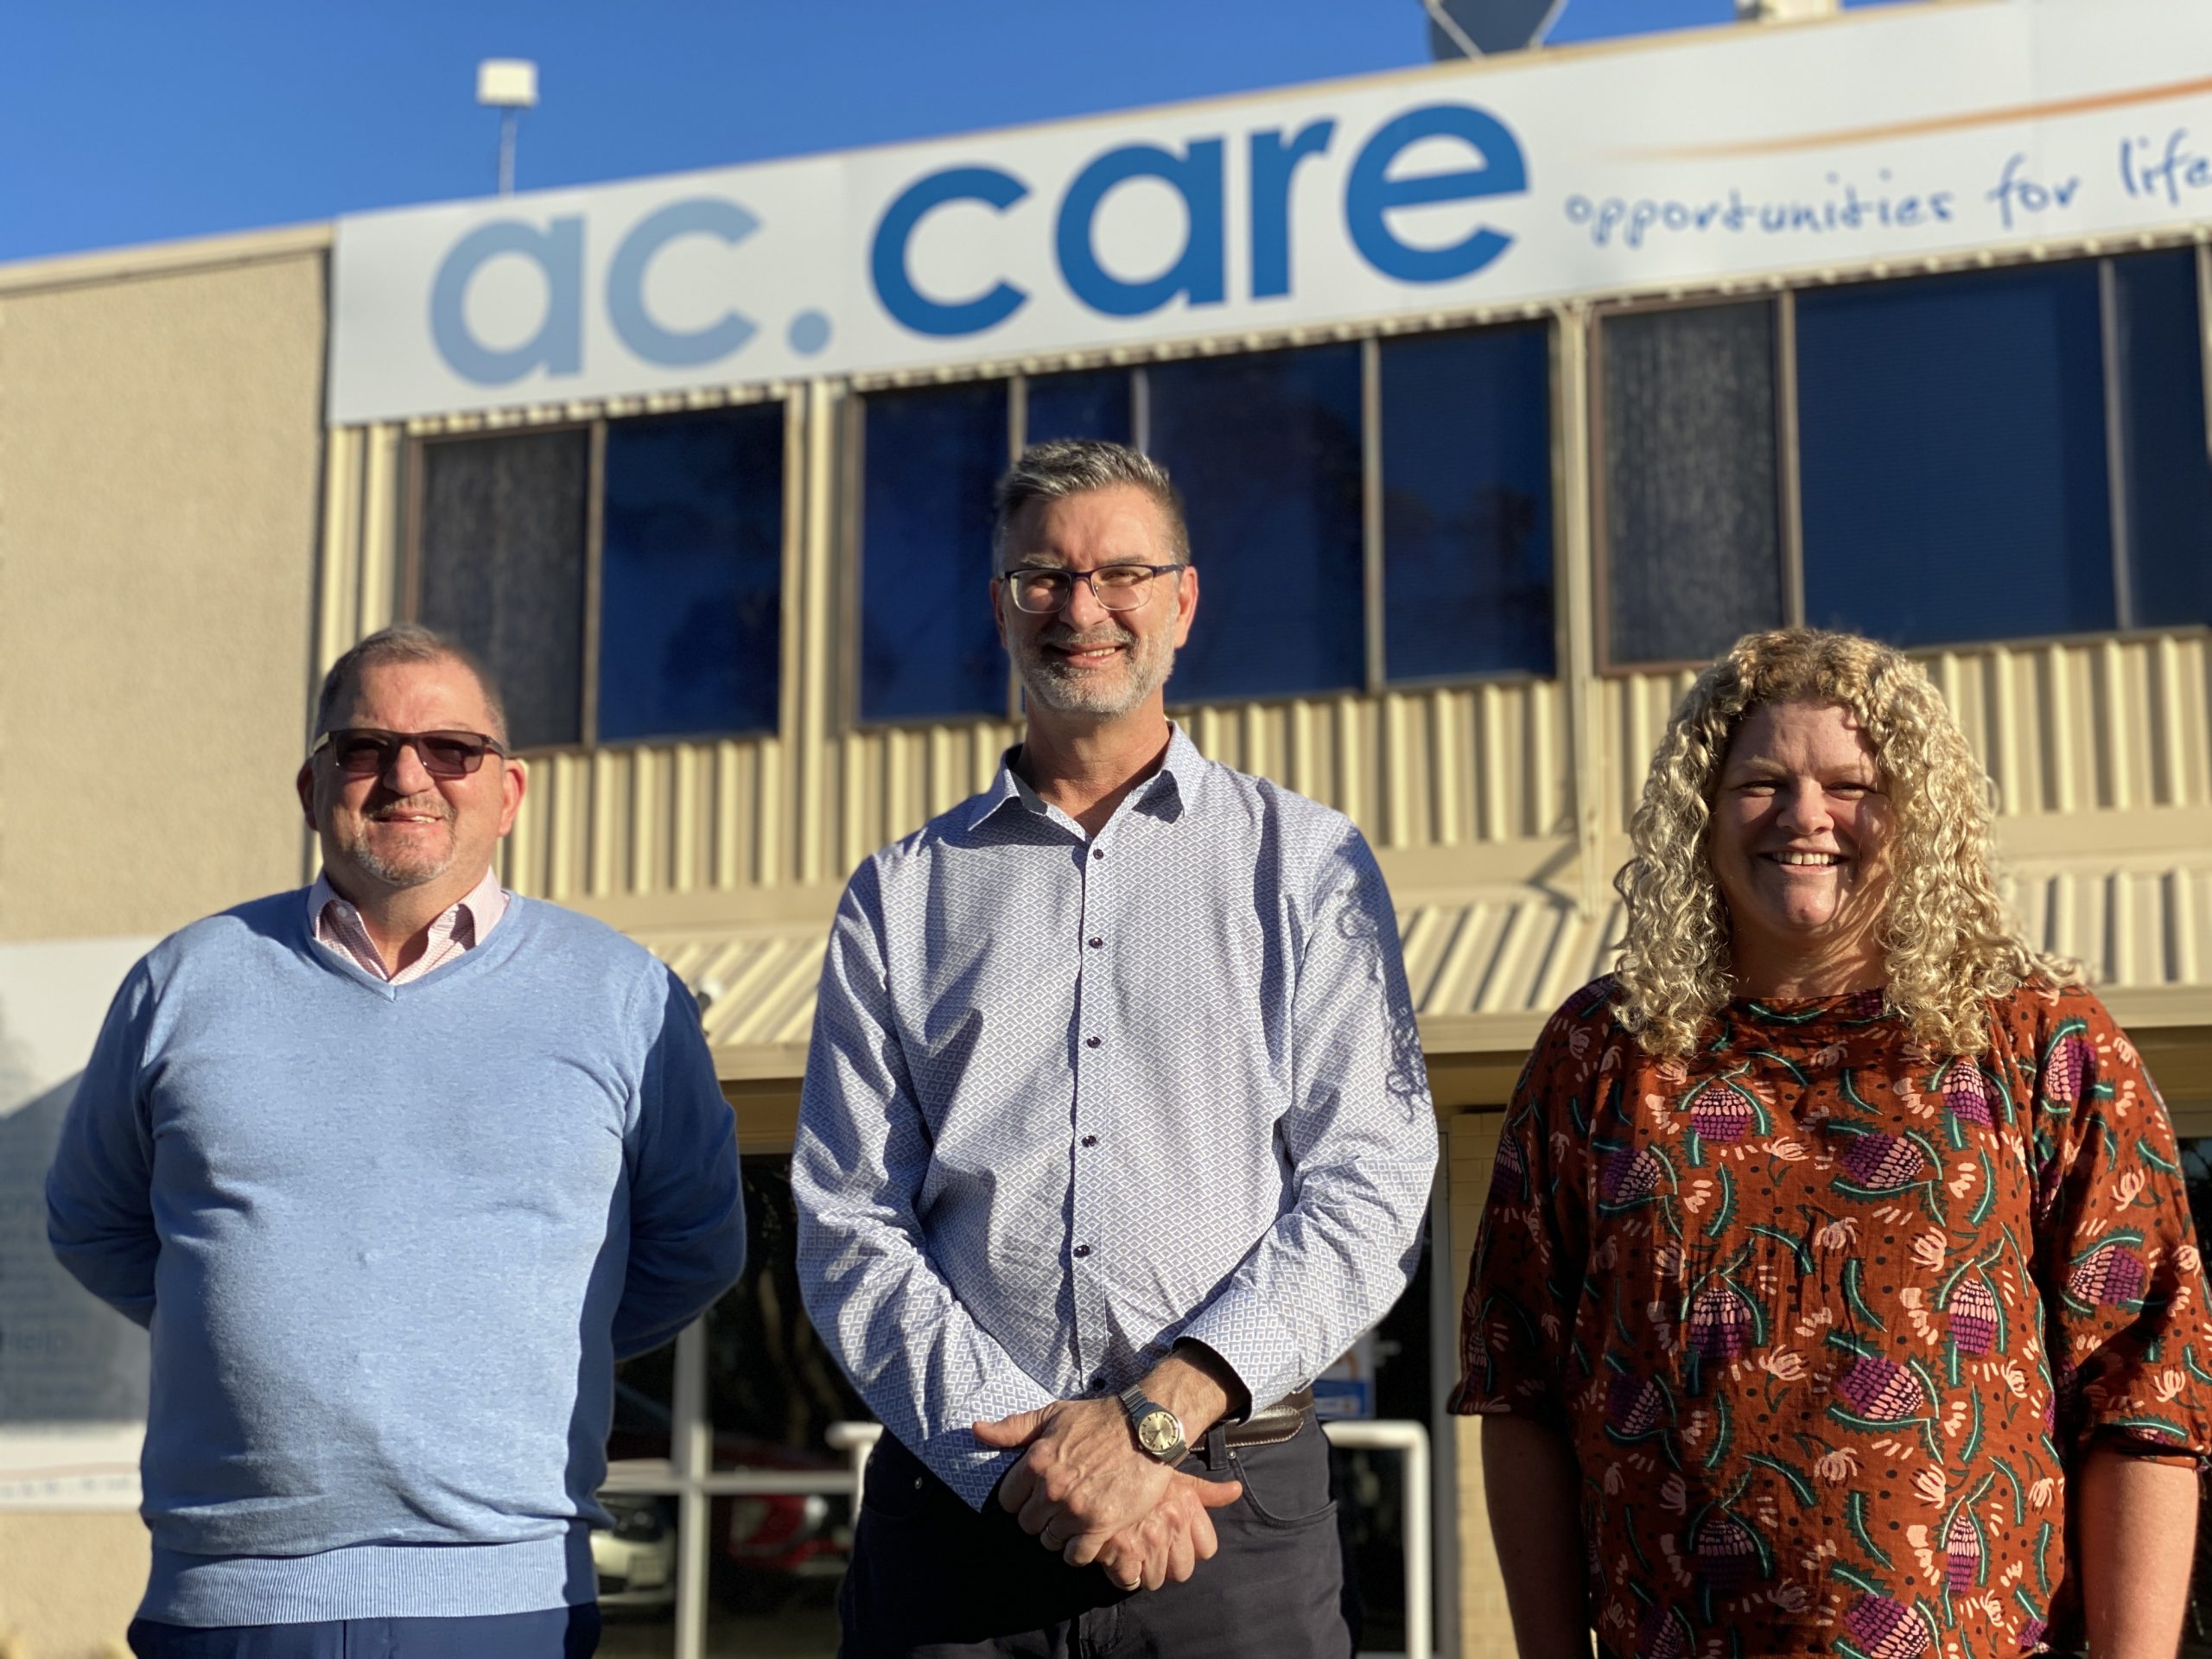 CARE EXPANSION: ac.care out of home care executive manager Dan Mitchell, CEO Shane Maddocks and community services general manager Kirsty Barnett welcome the announcement the agency’s child and youth residential care service will be expanded to the Riverland.